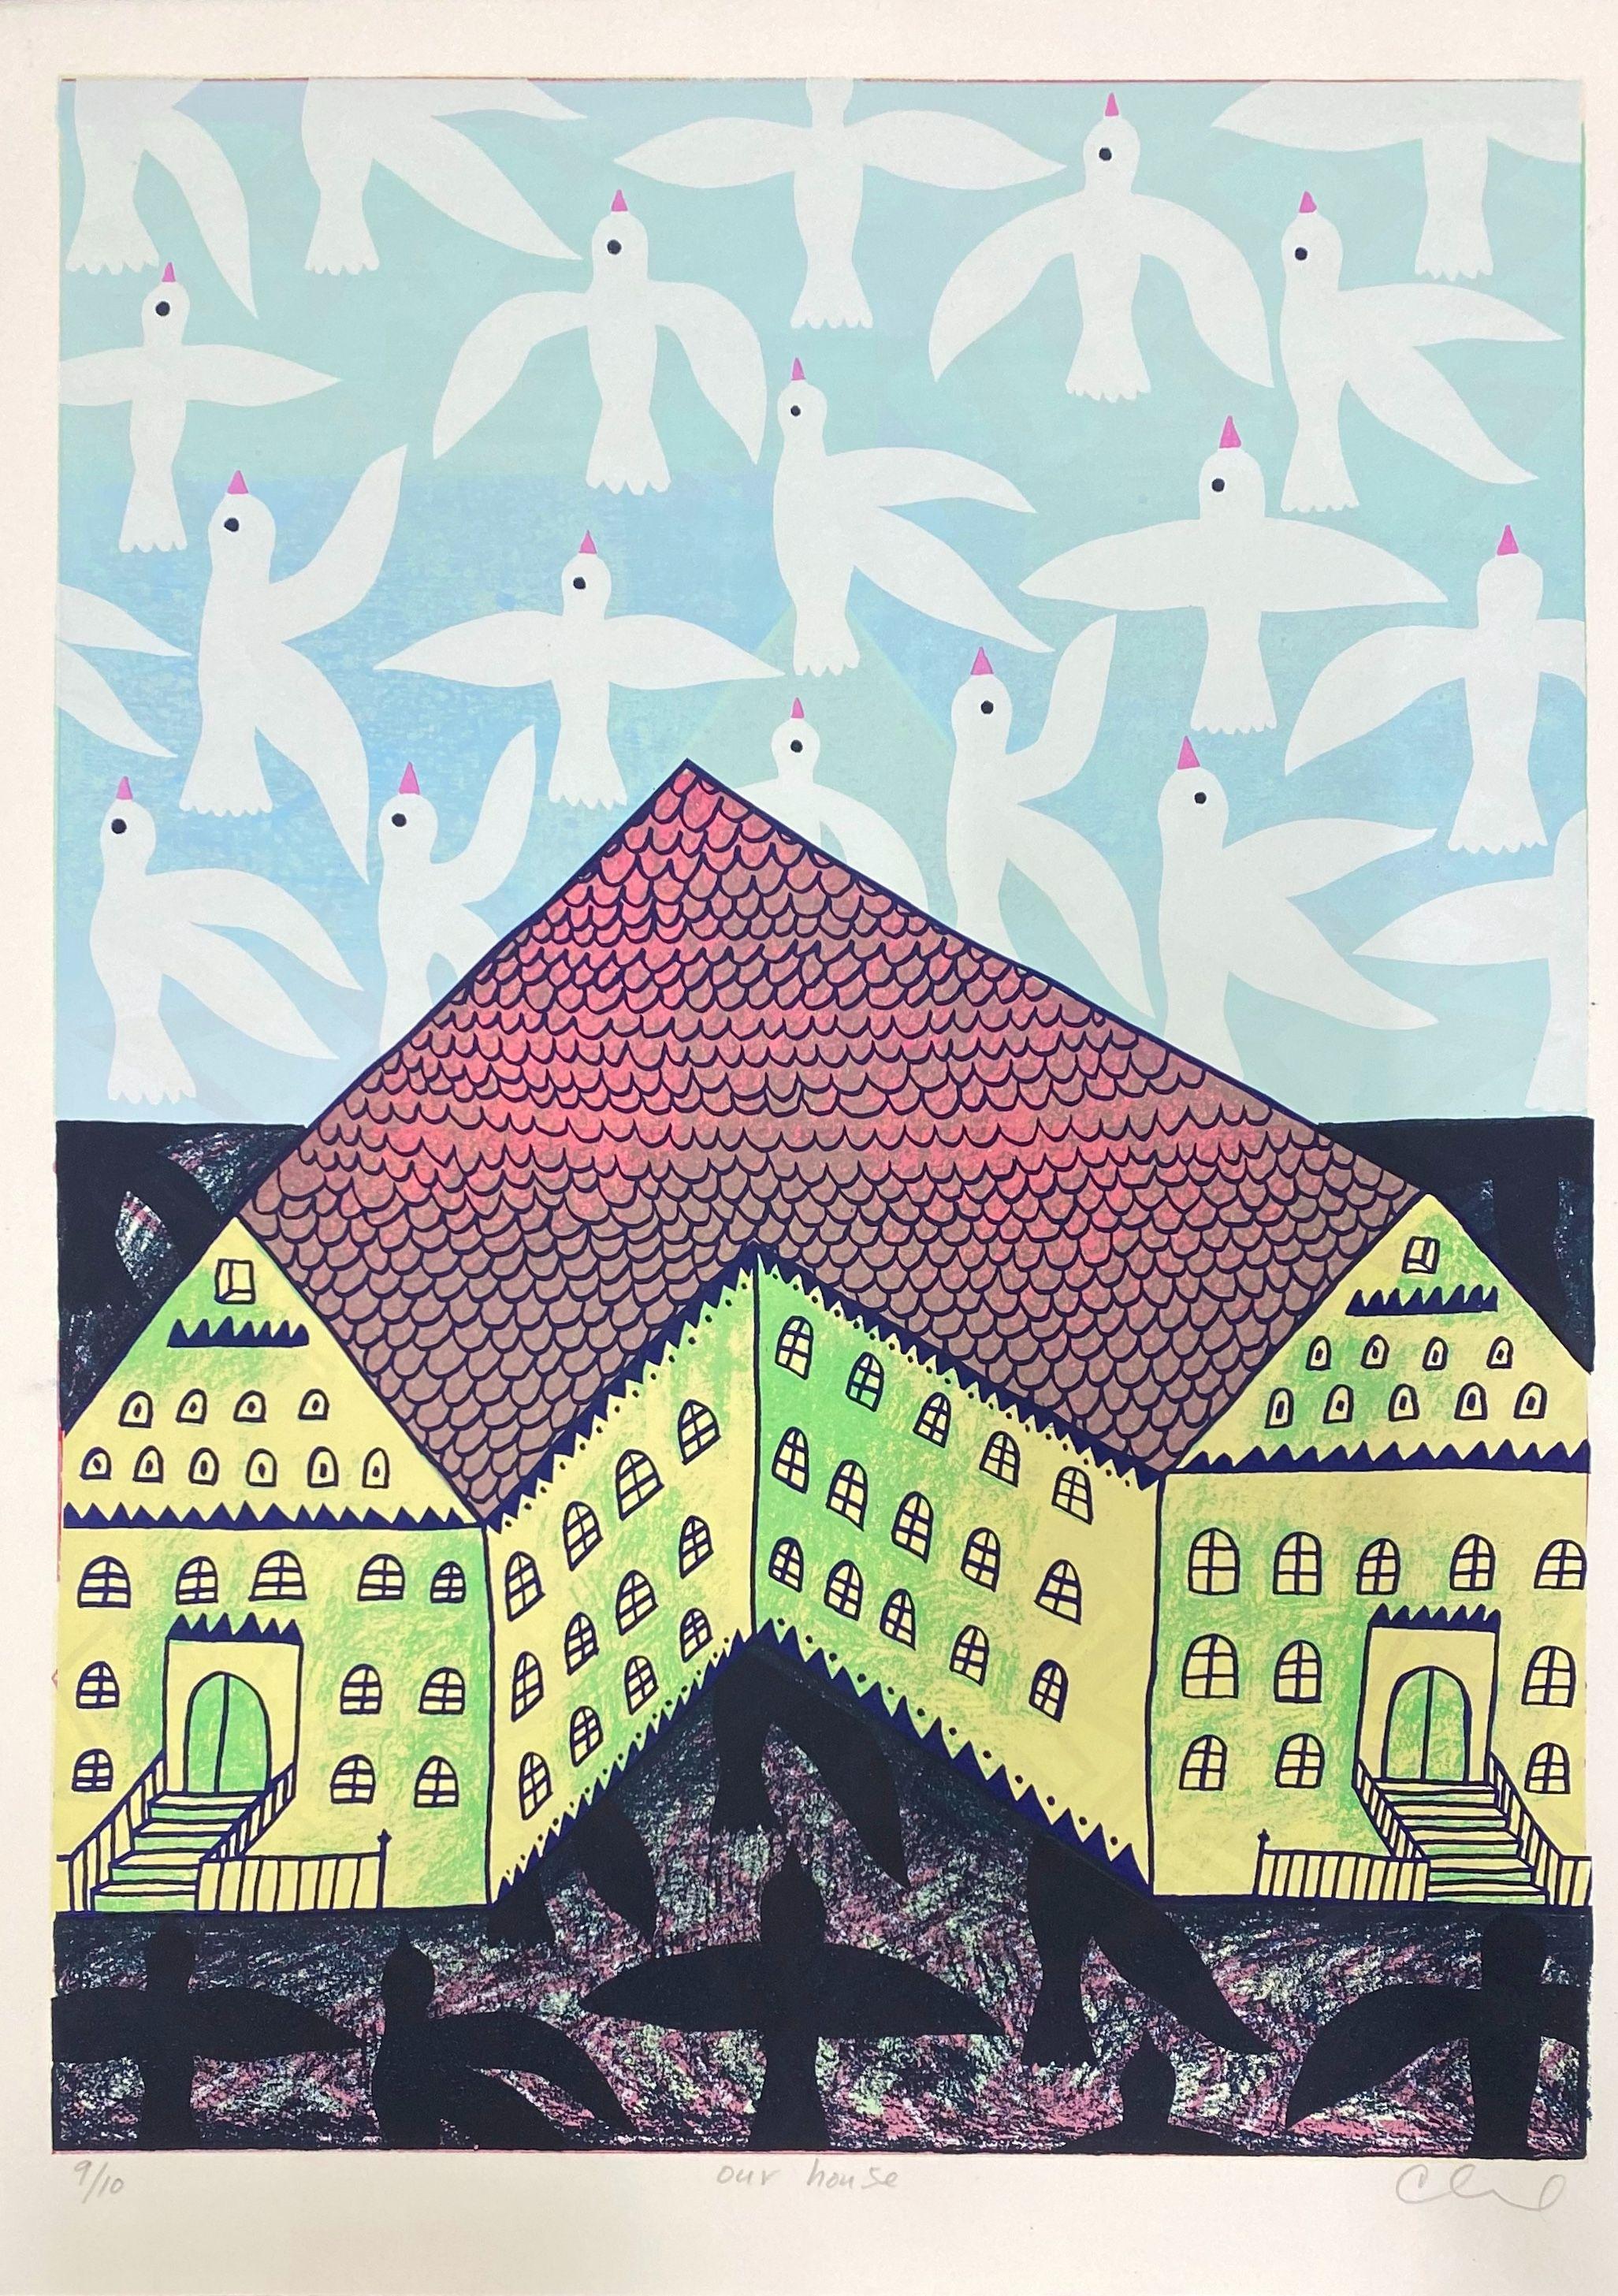 Chadwick Tolley Abstract Print - Our House (3/10)